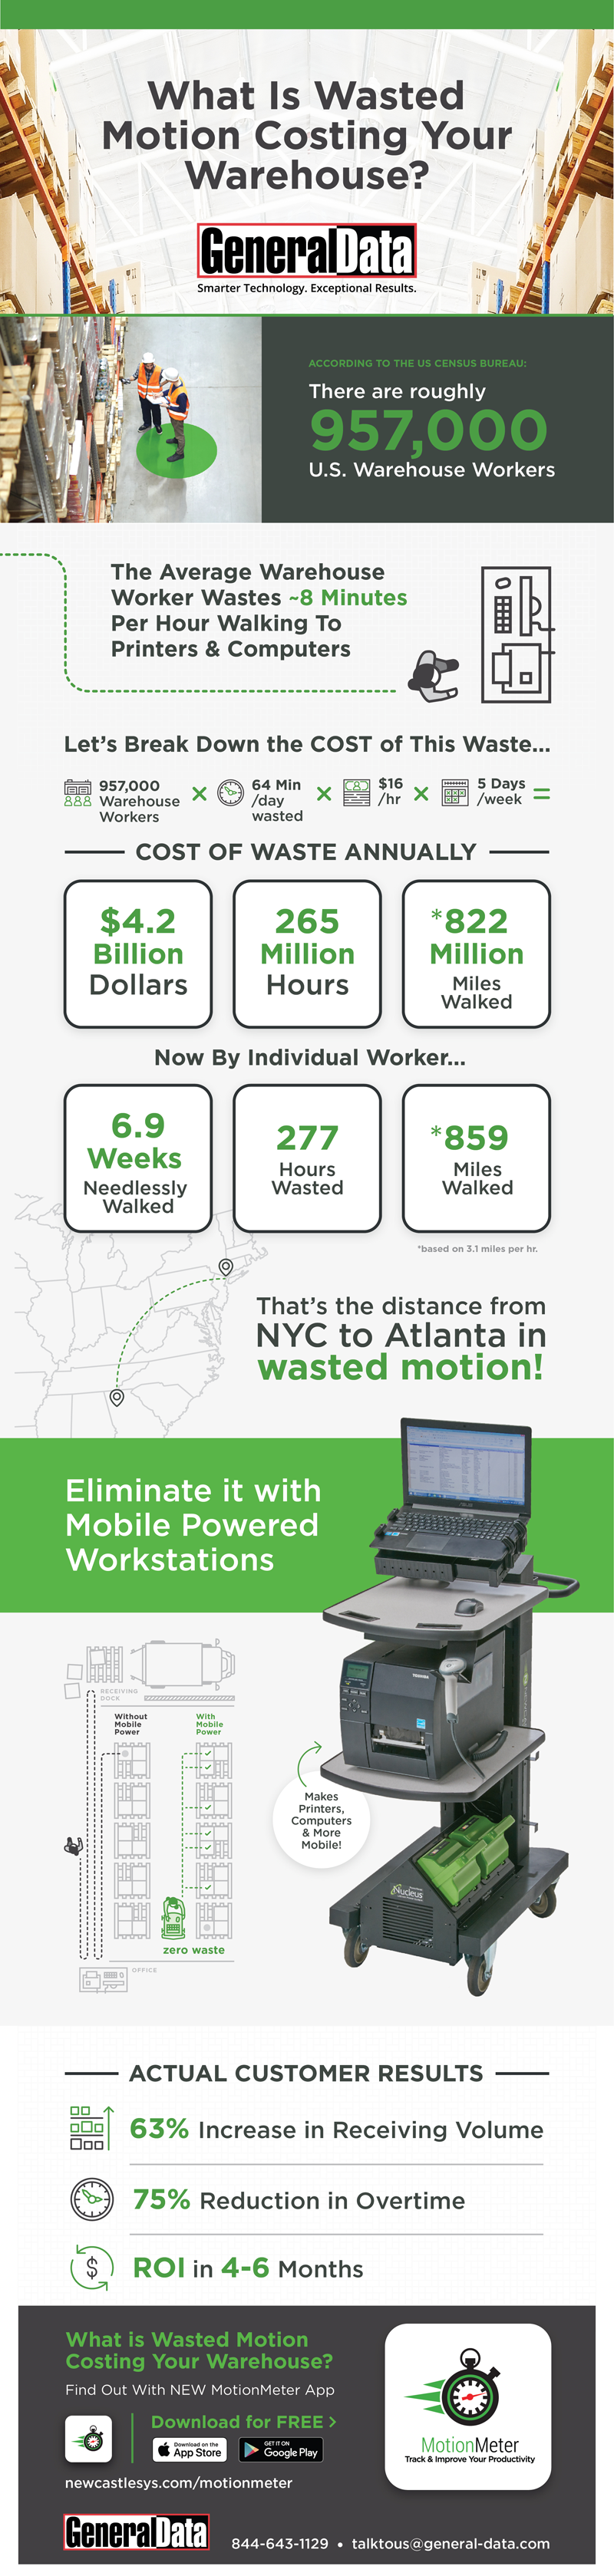 What Is Wasted Motion Costing Your Warehouse?